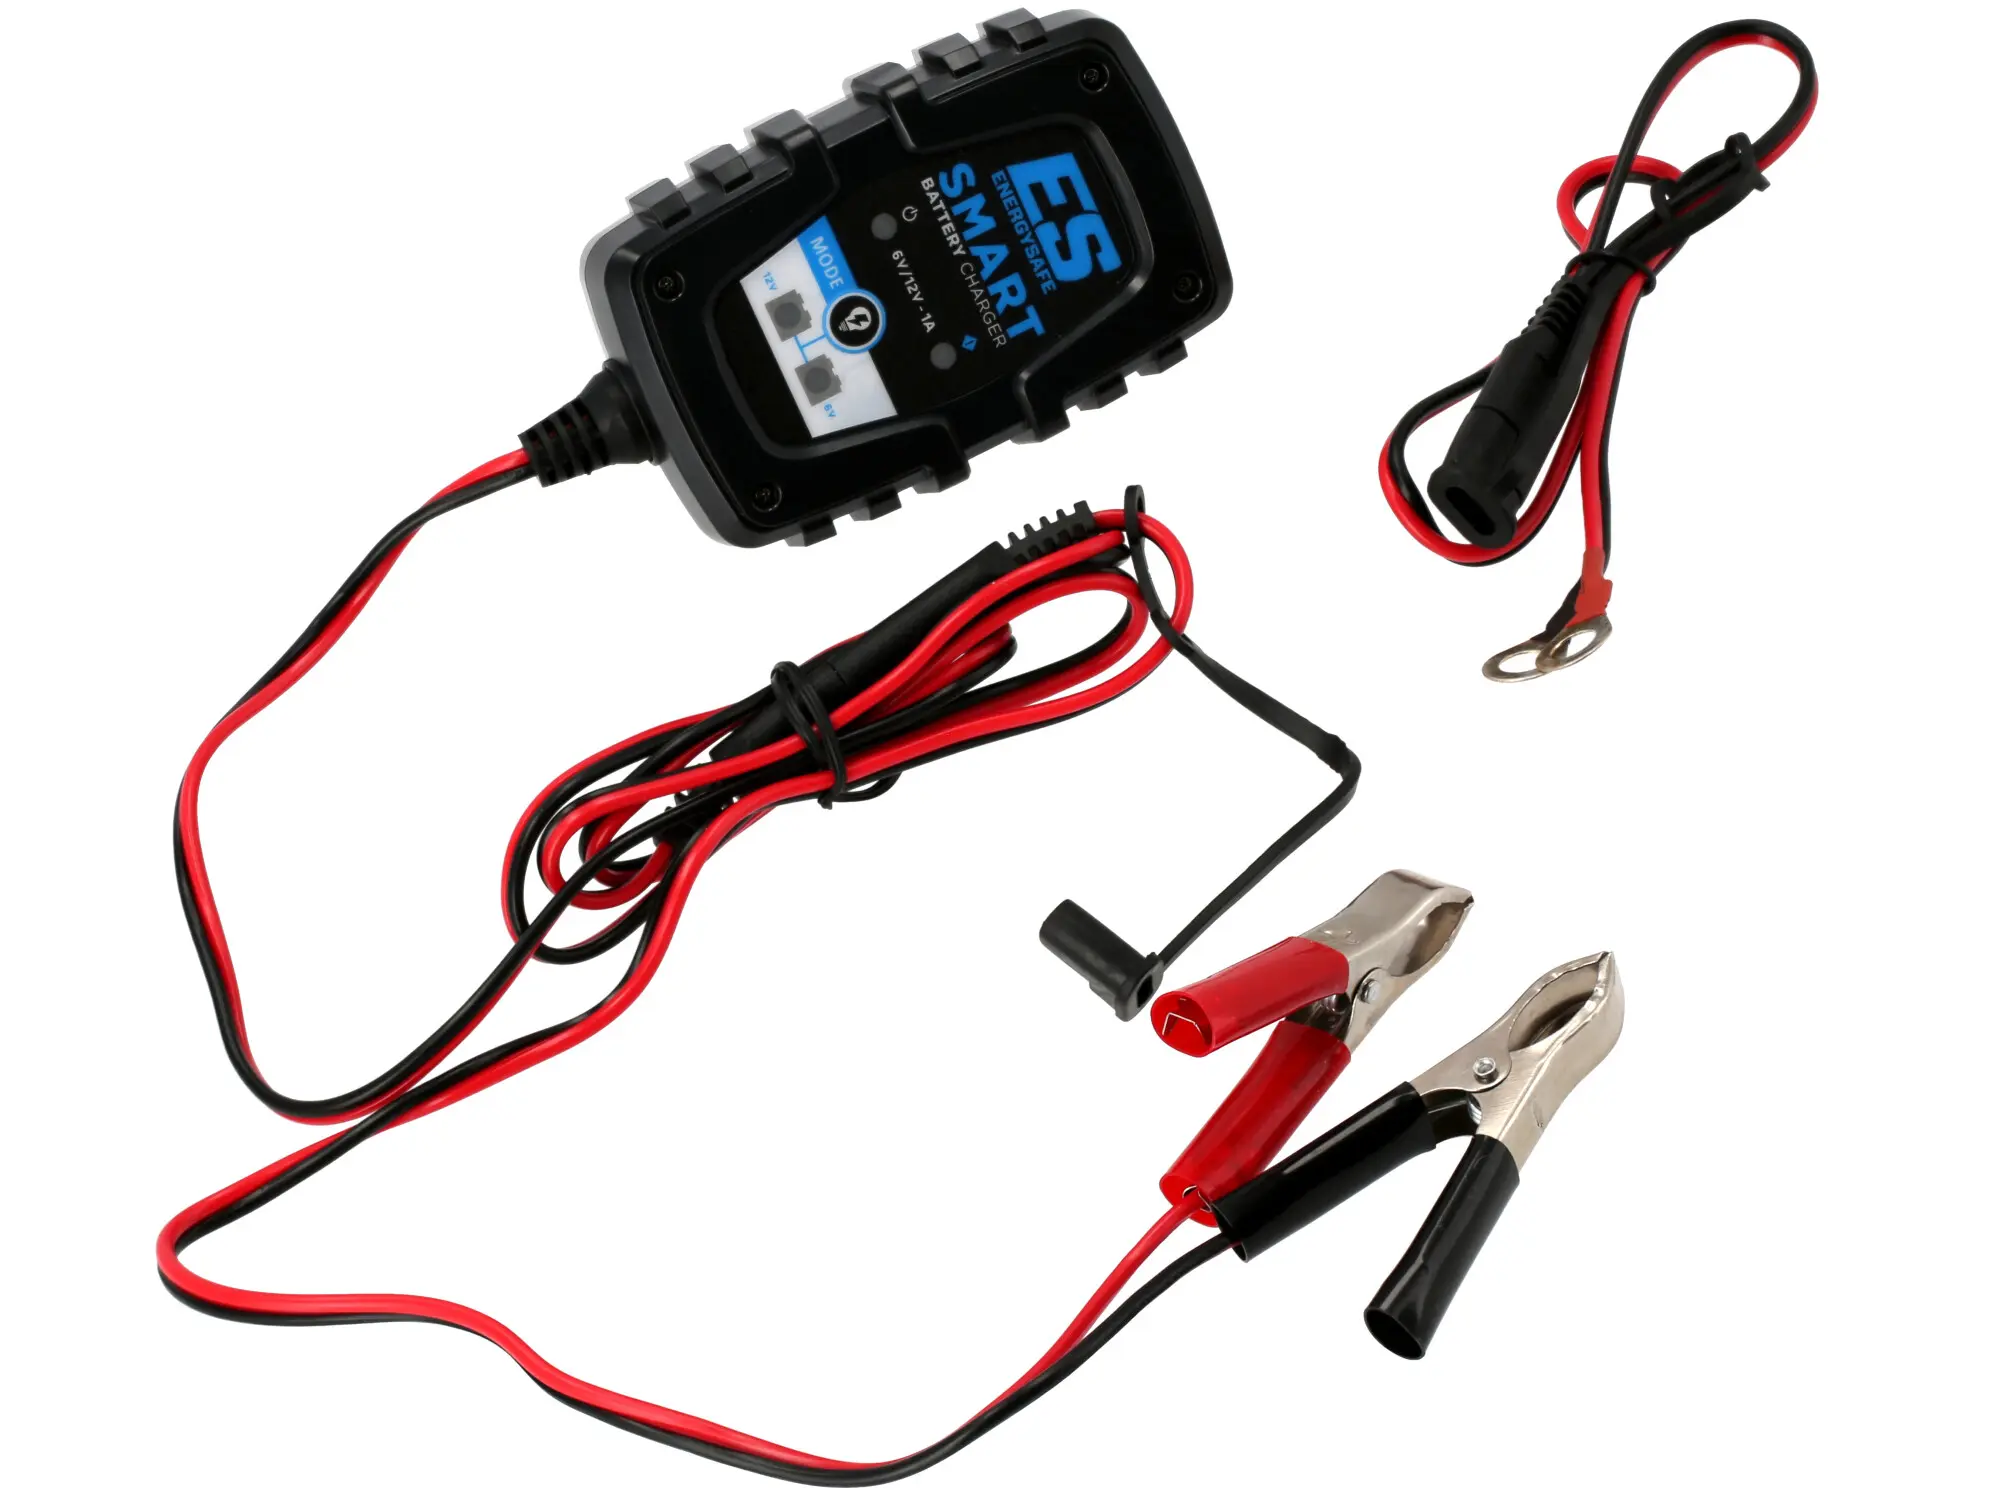 Charger for battery 6 - 12 Volt from Energysafe (up to 14Ah), Item no: 10075703 - Image 1